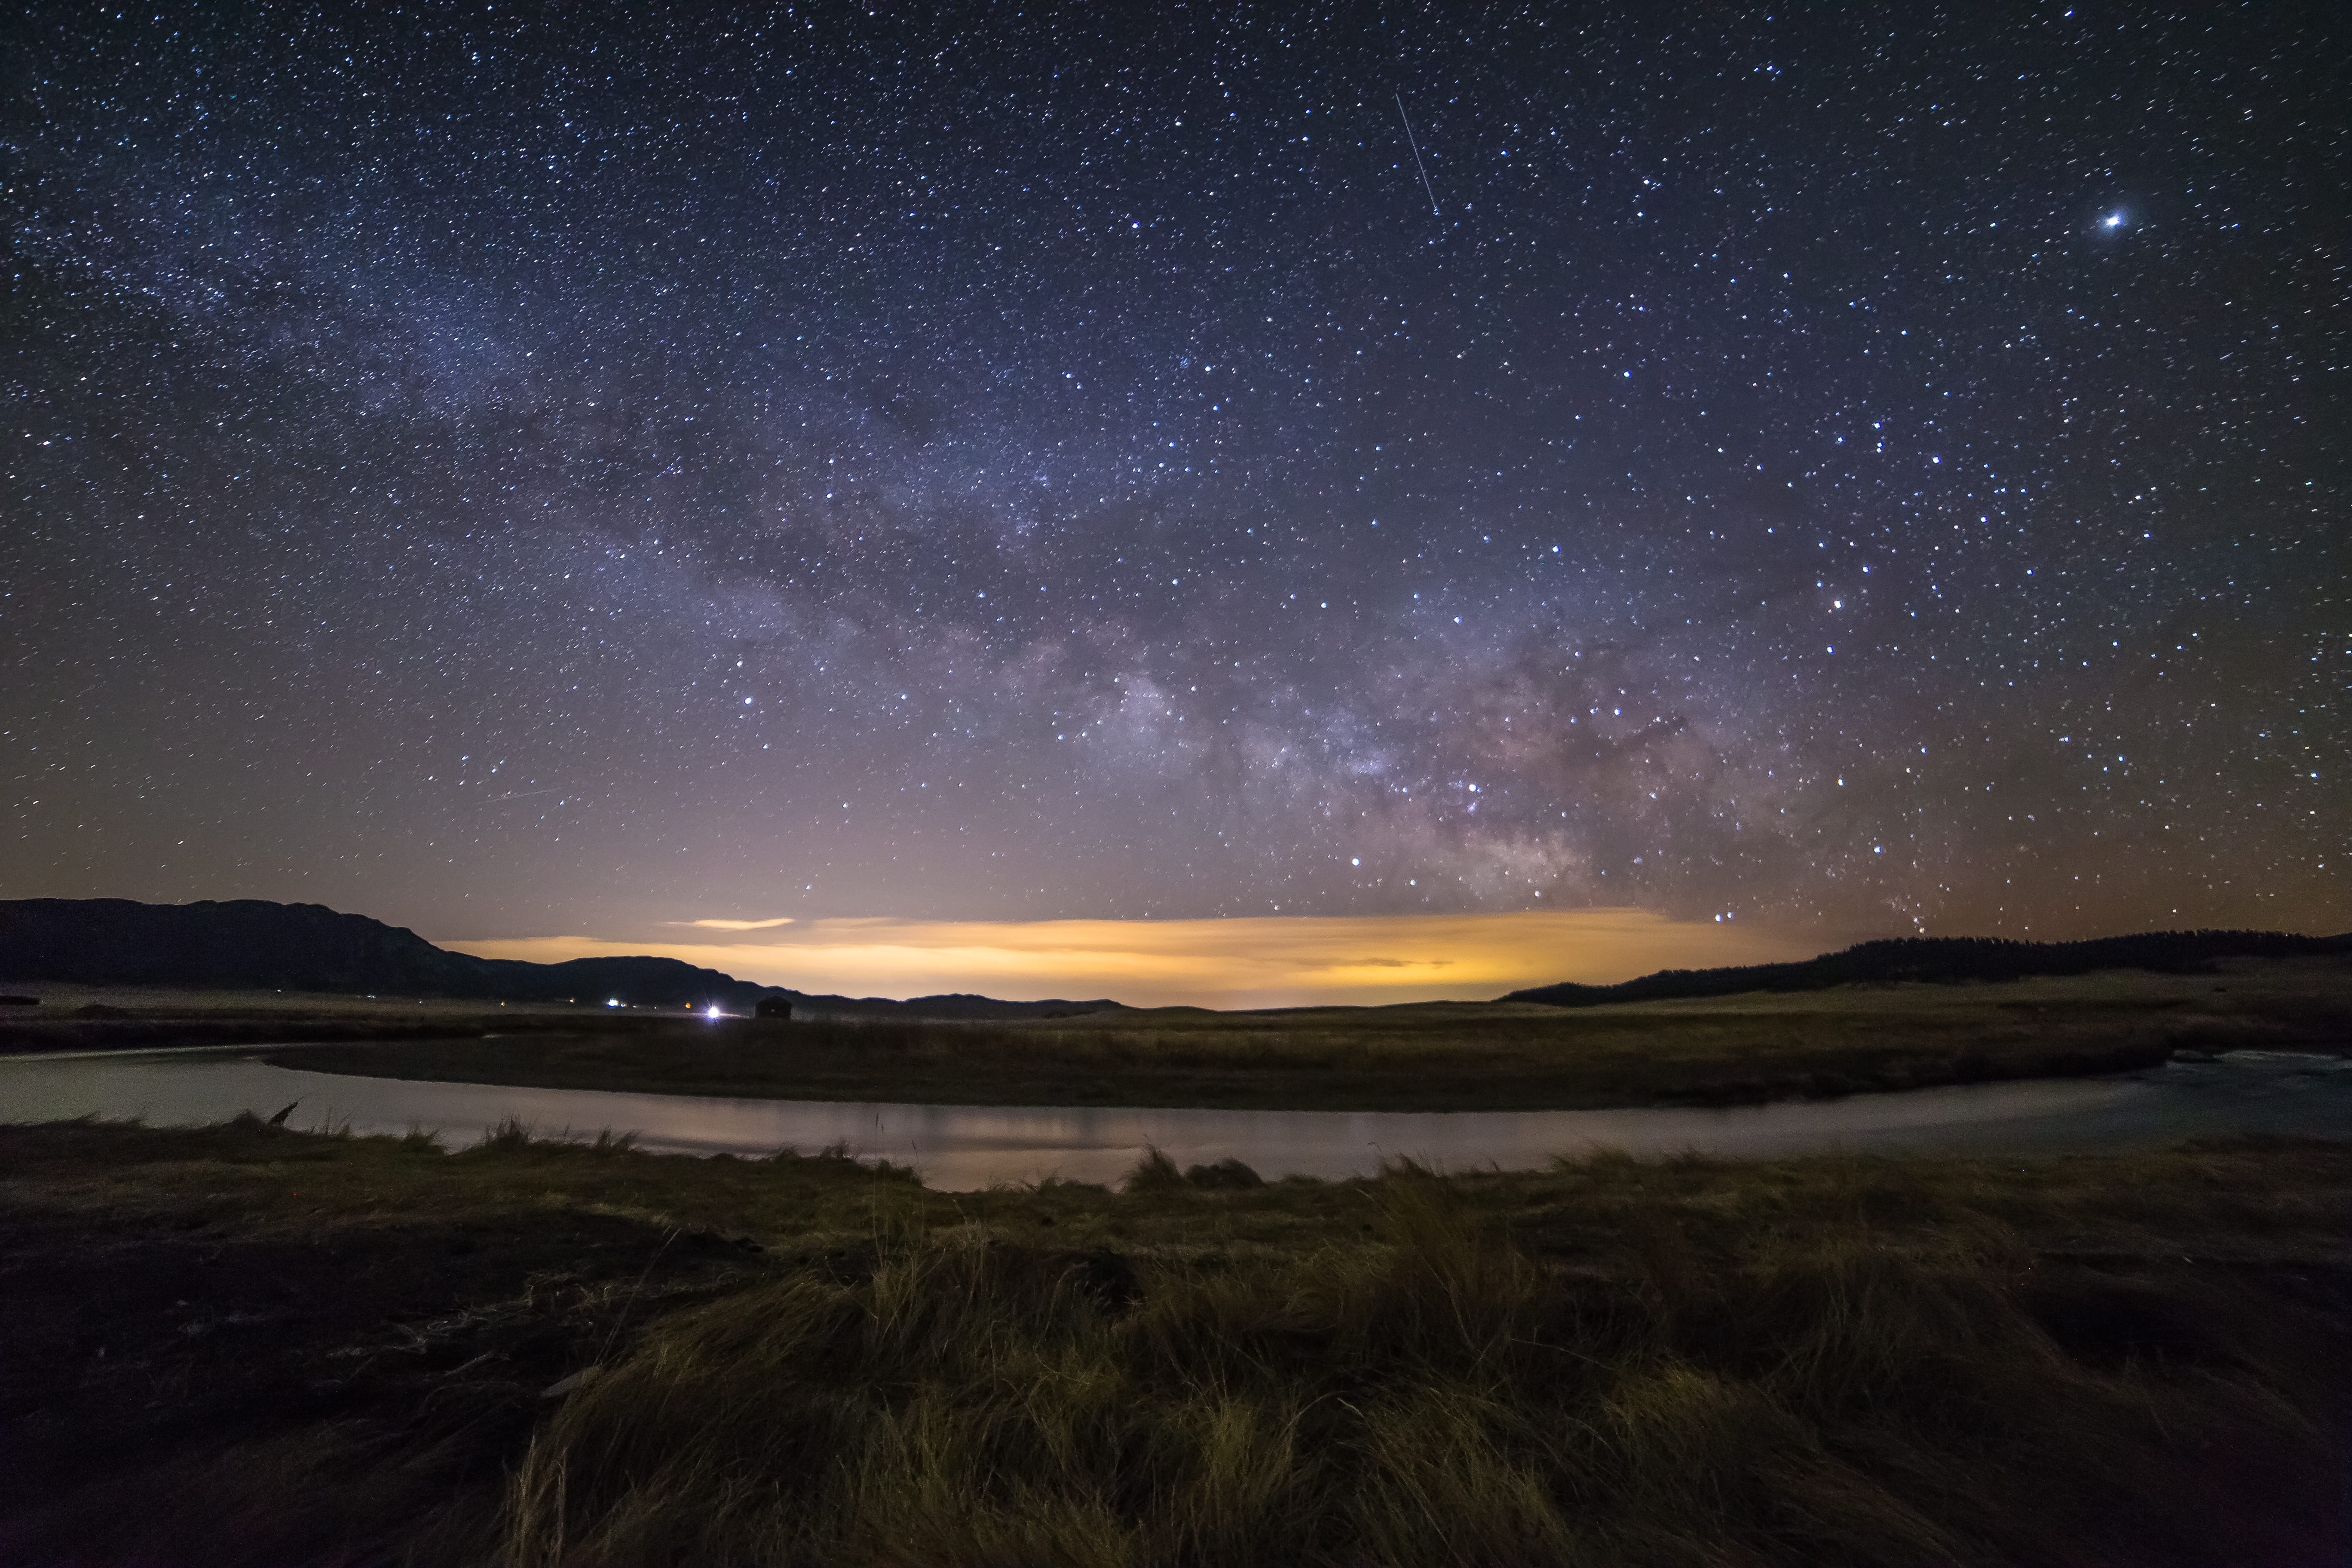 body of water under night sky, lake surrounded by green grass field under starry night